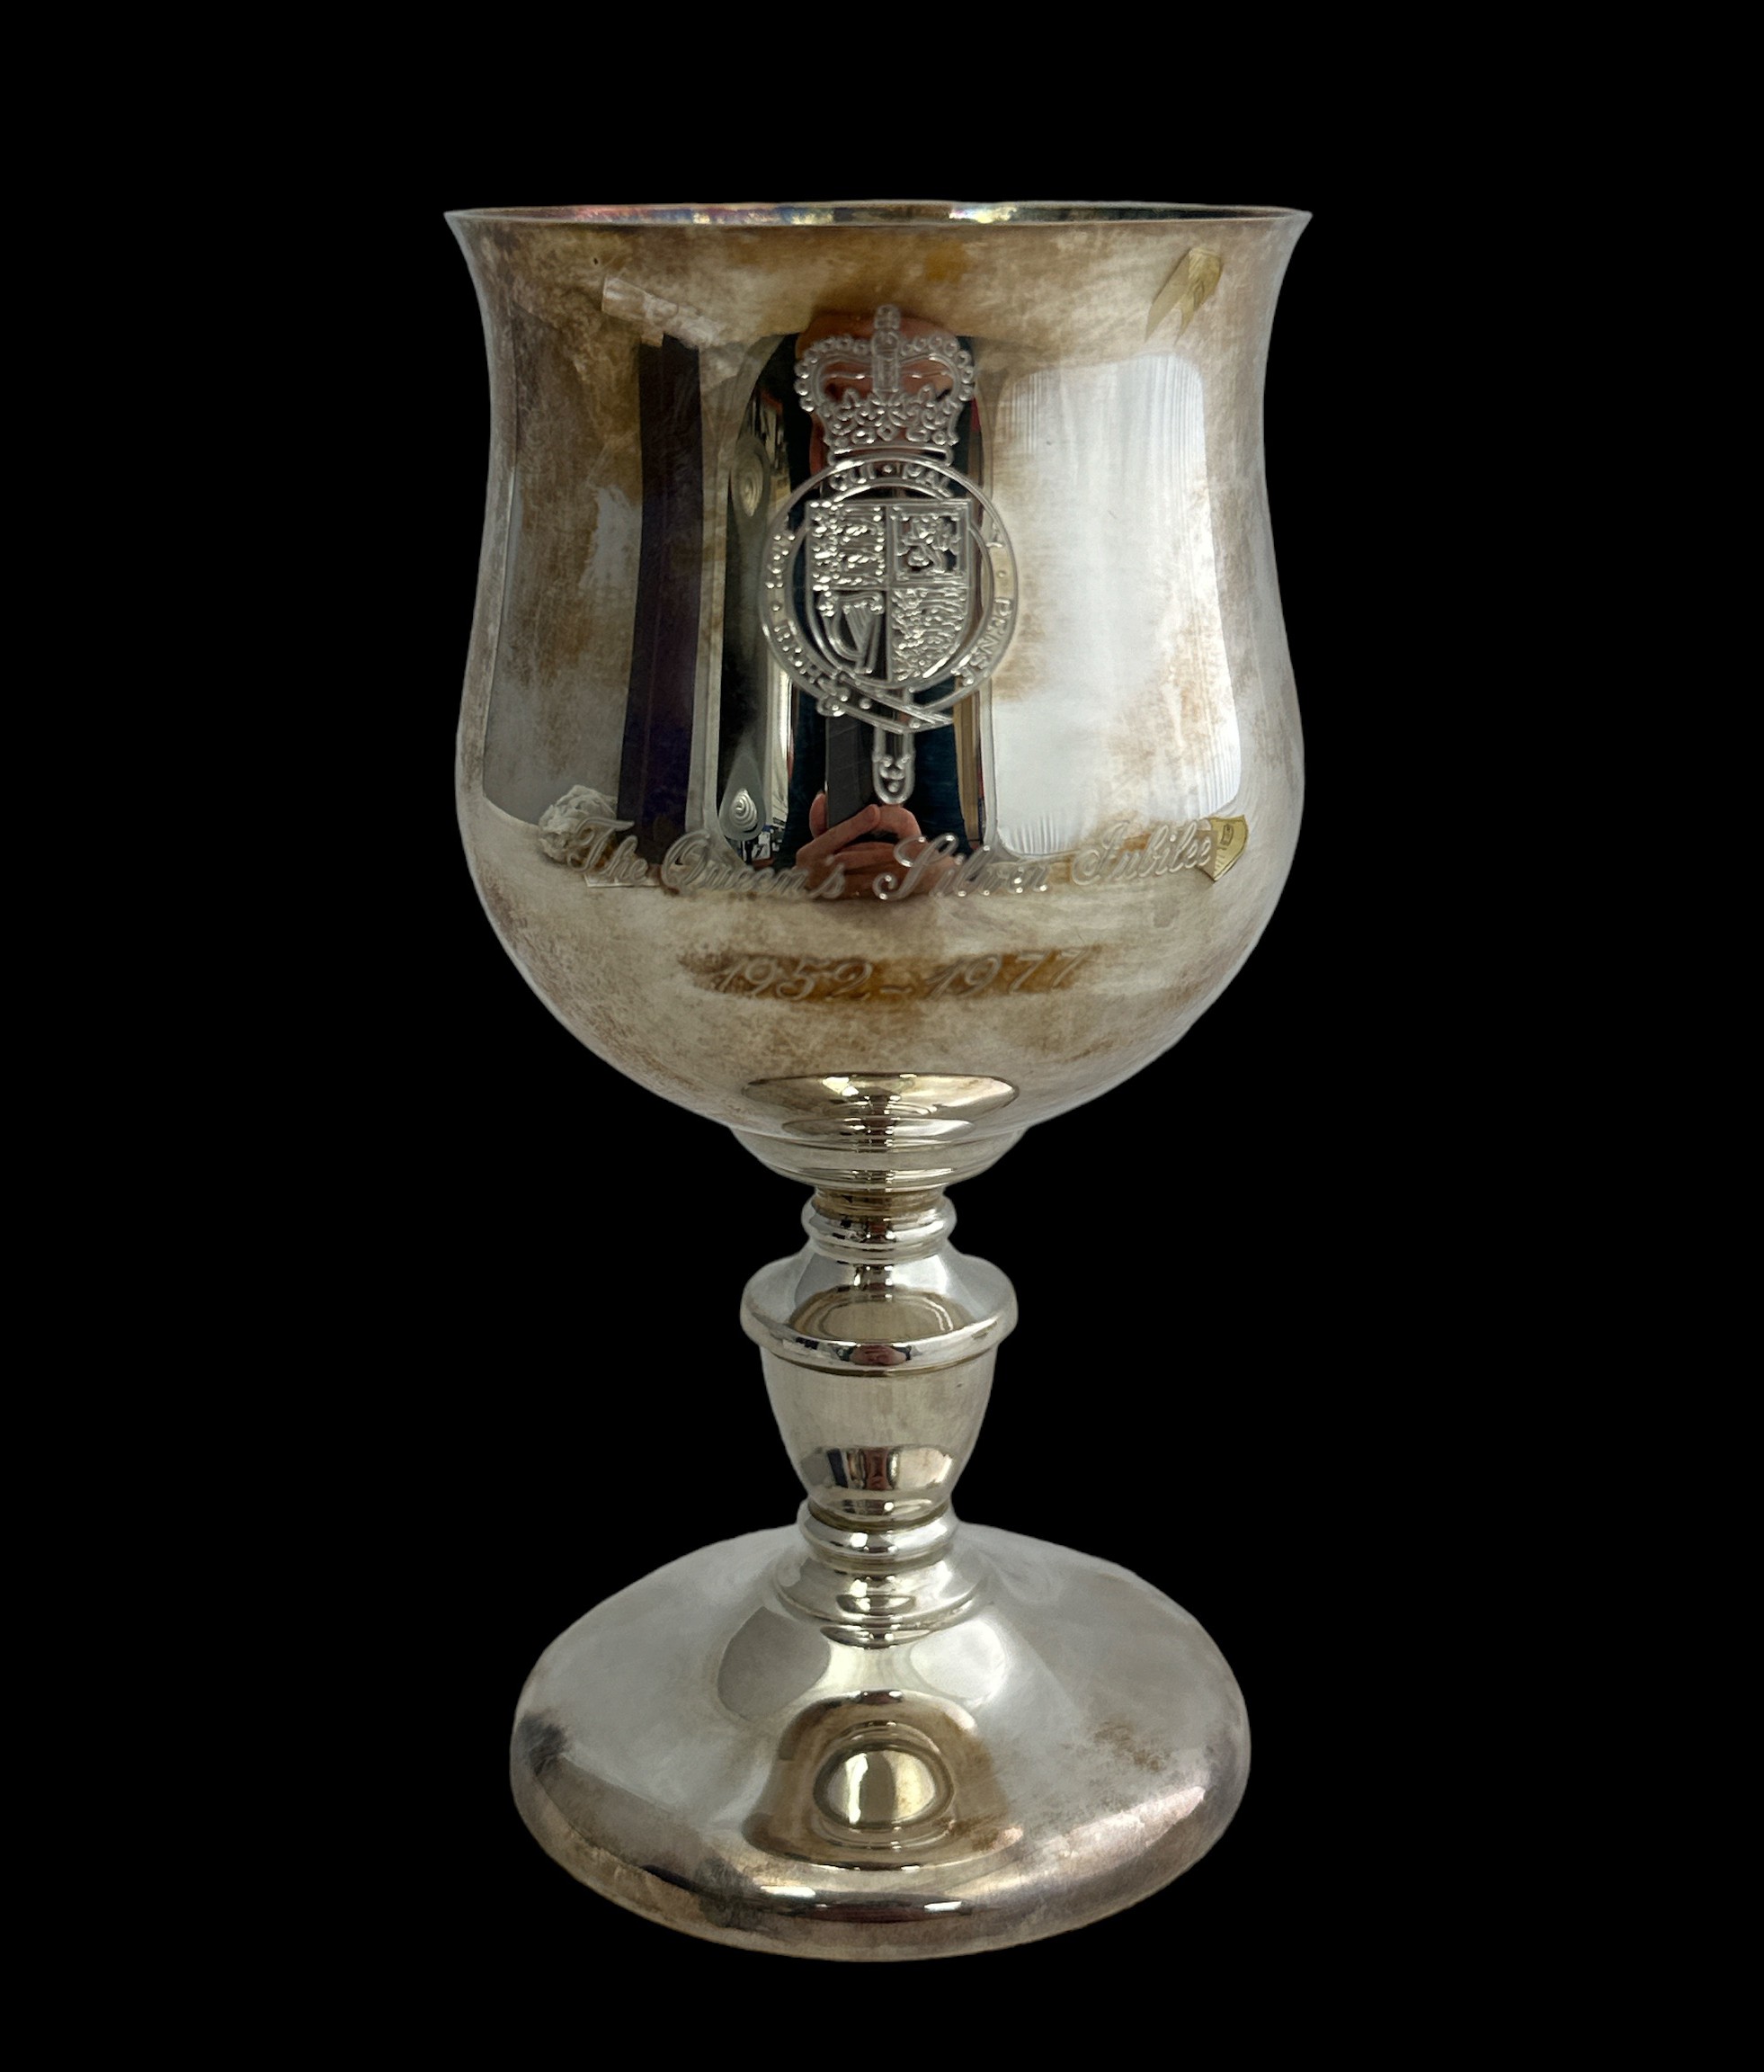 Queens Silver Jubilee silver goblet by A.T Cannon Ltd Birmingham, limited edition no.256 of 1,000, - Image 2 of 5